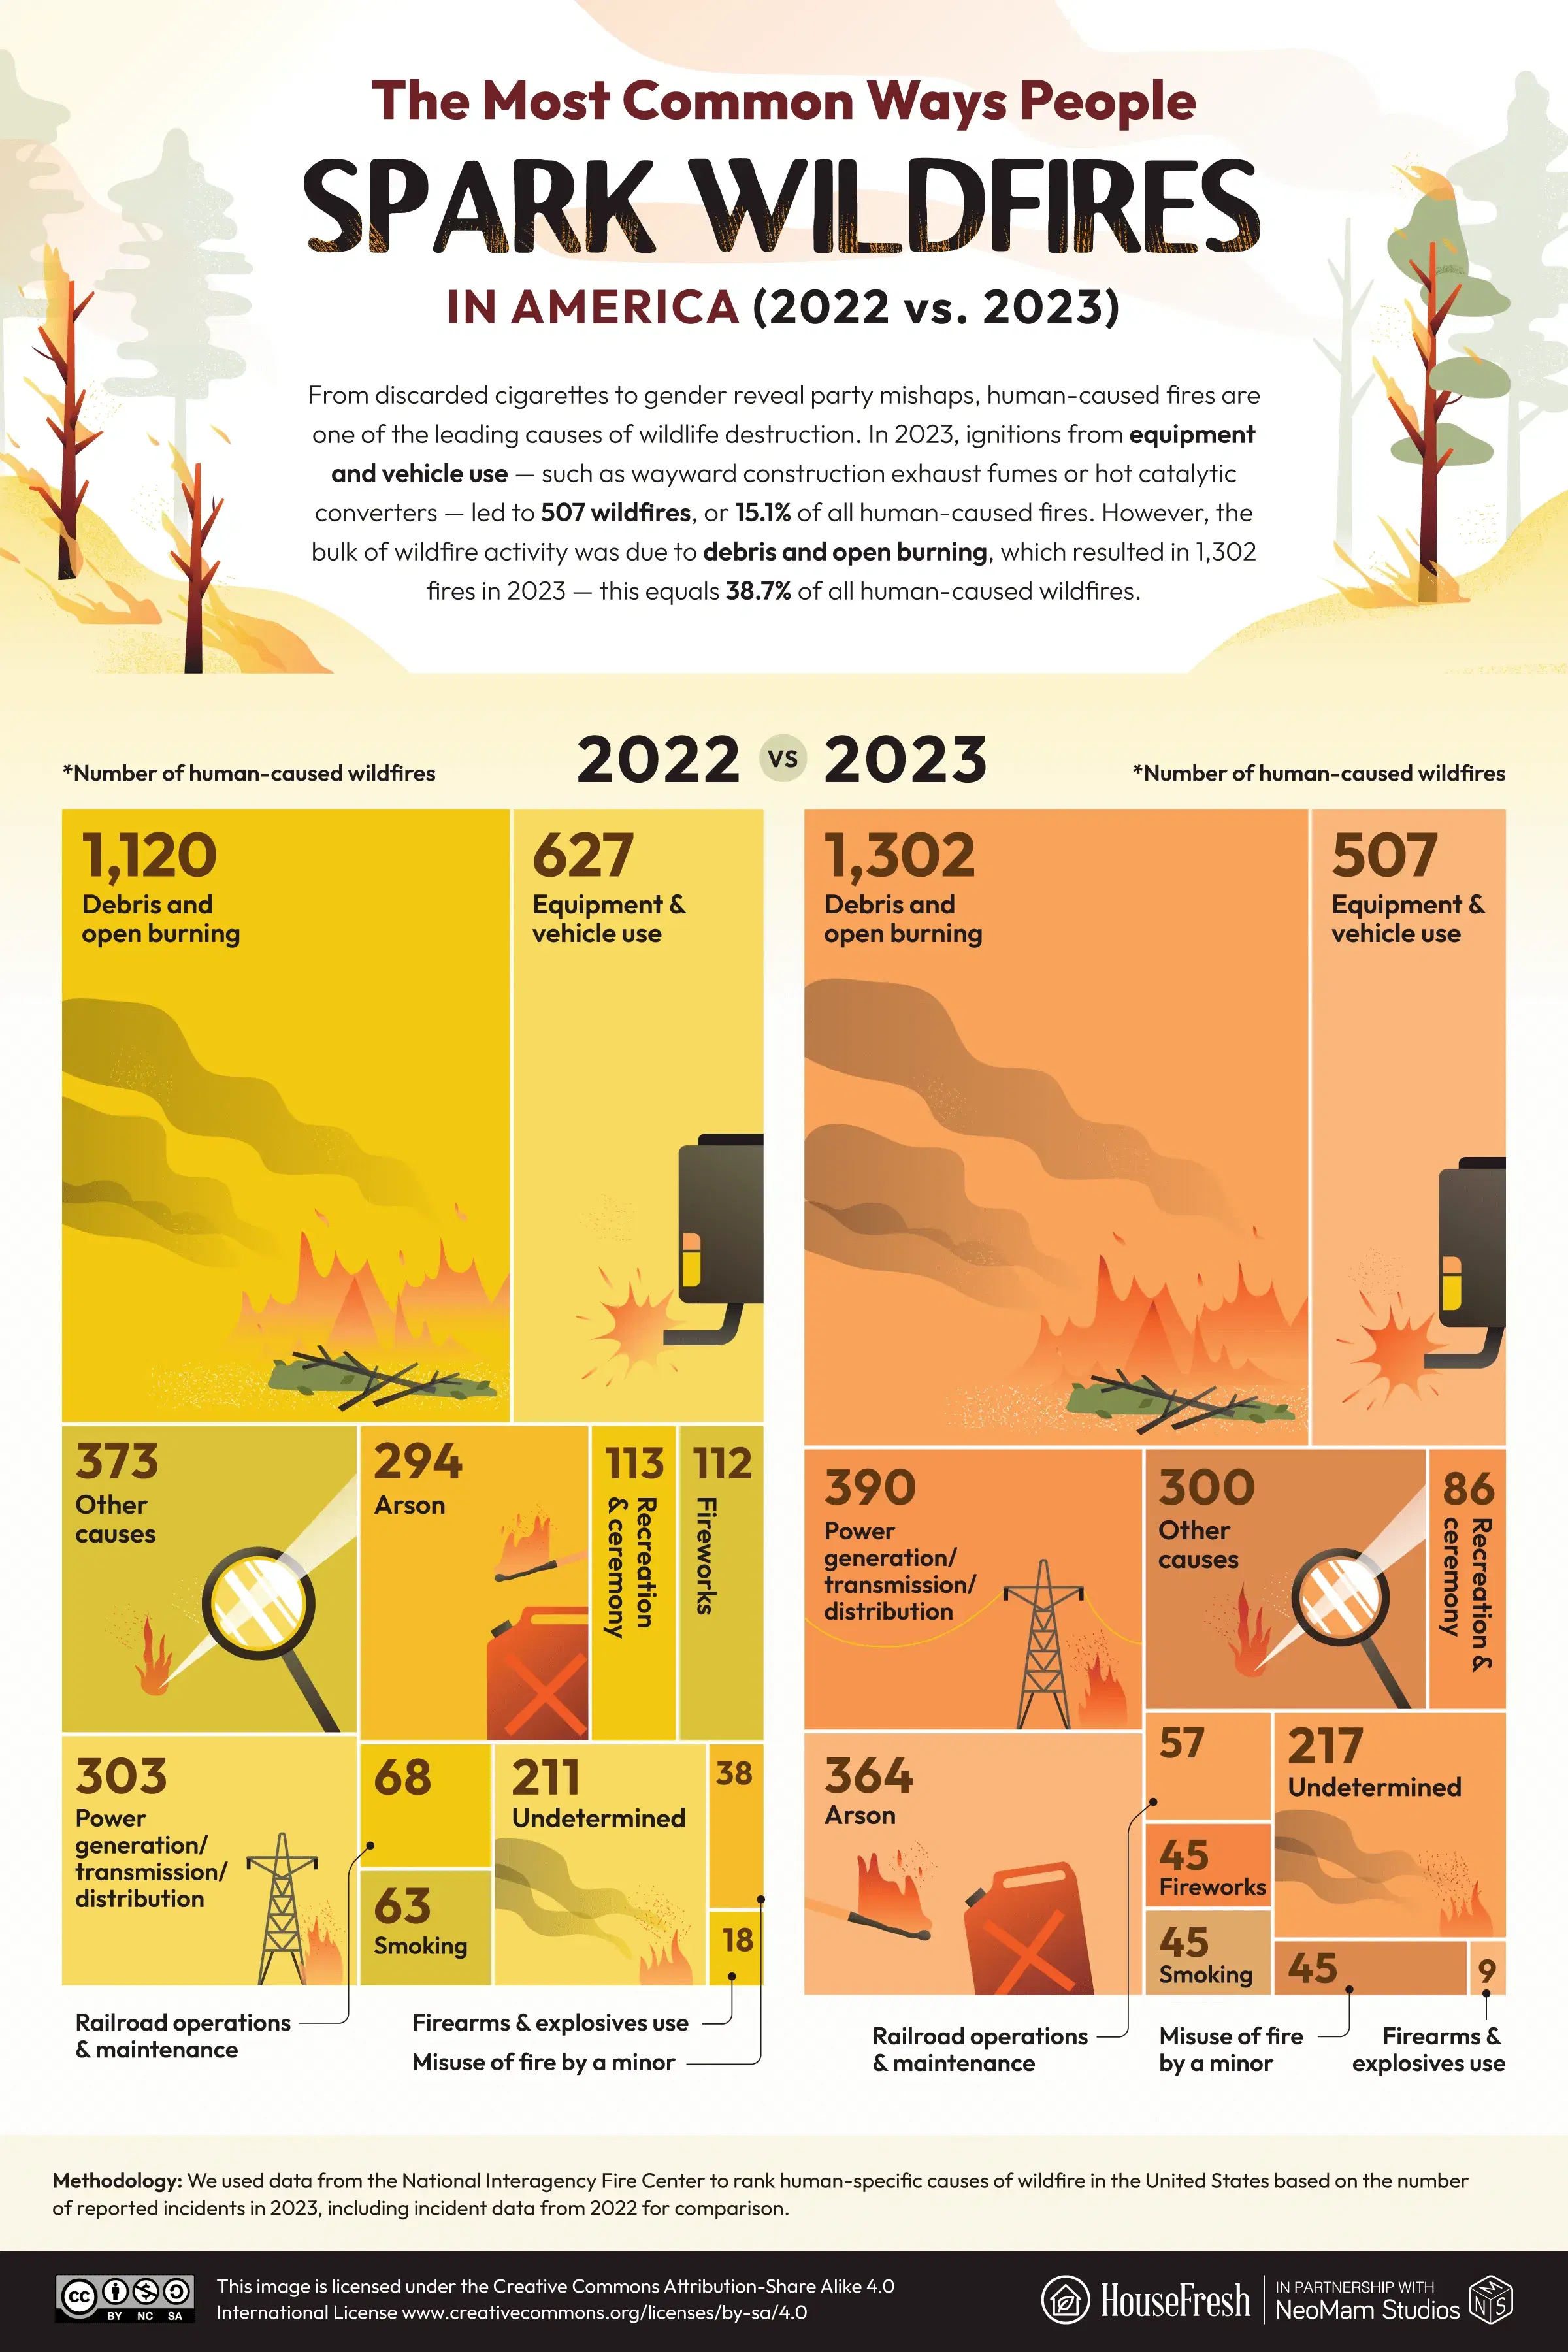 The most common human causes of wildfires in America (2022 vs 2023)